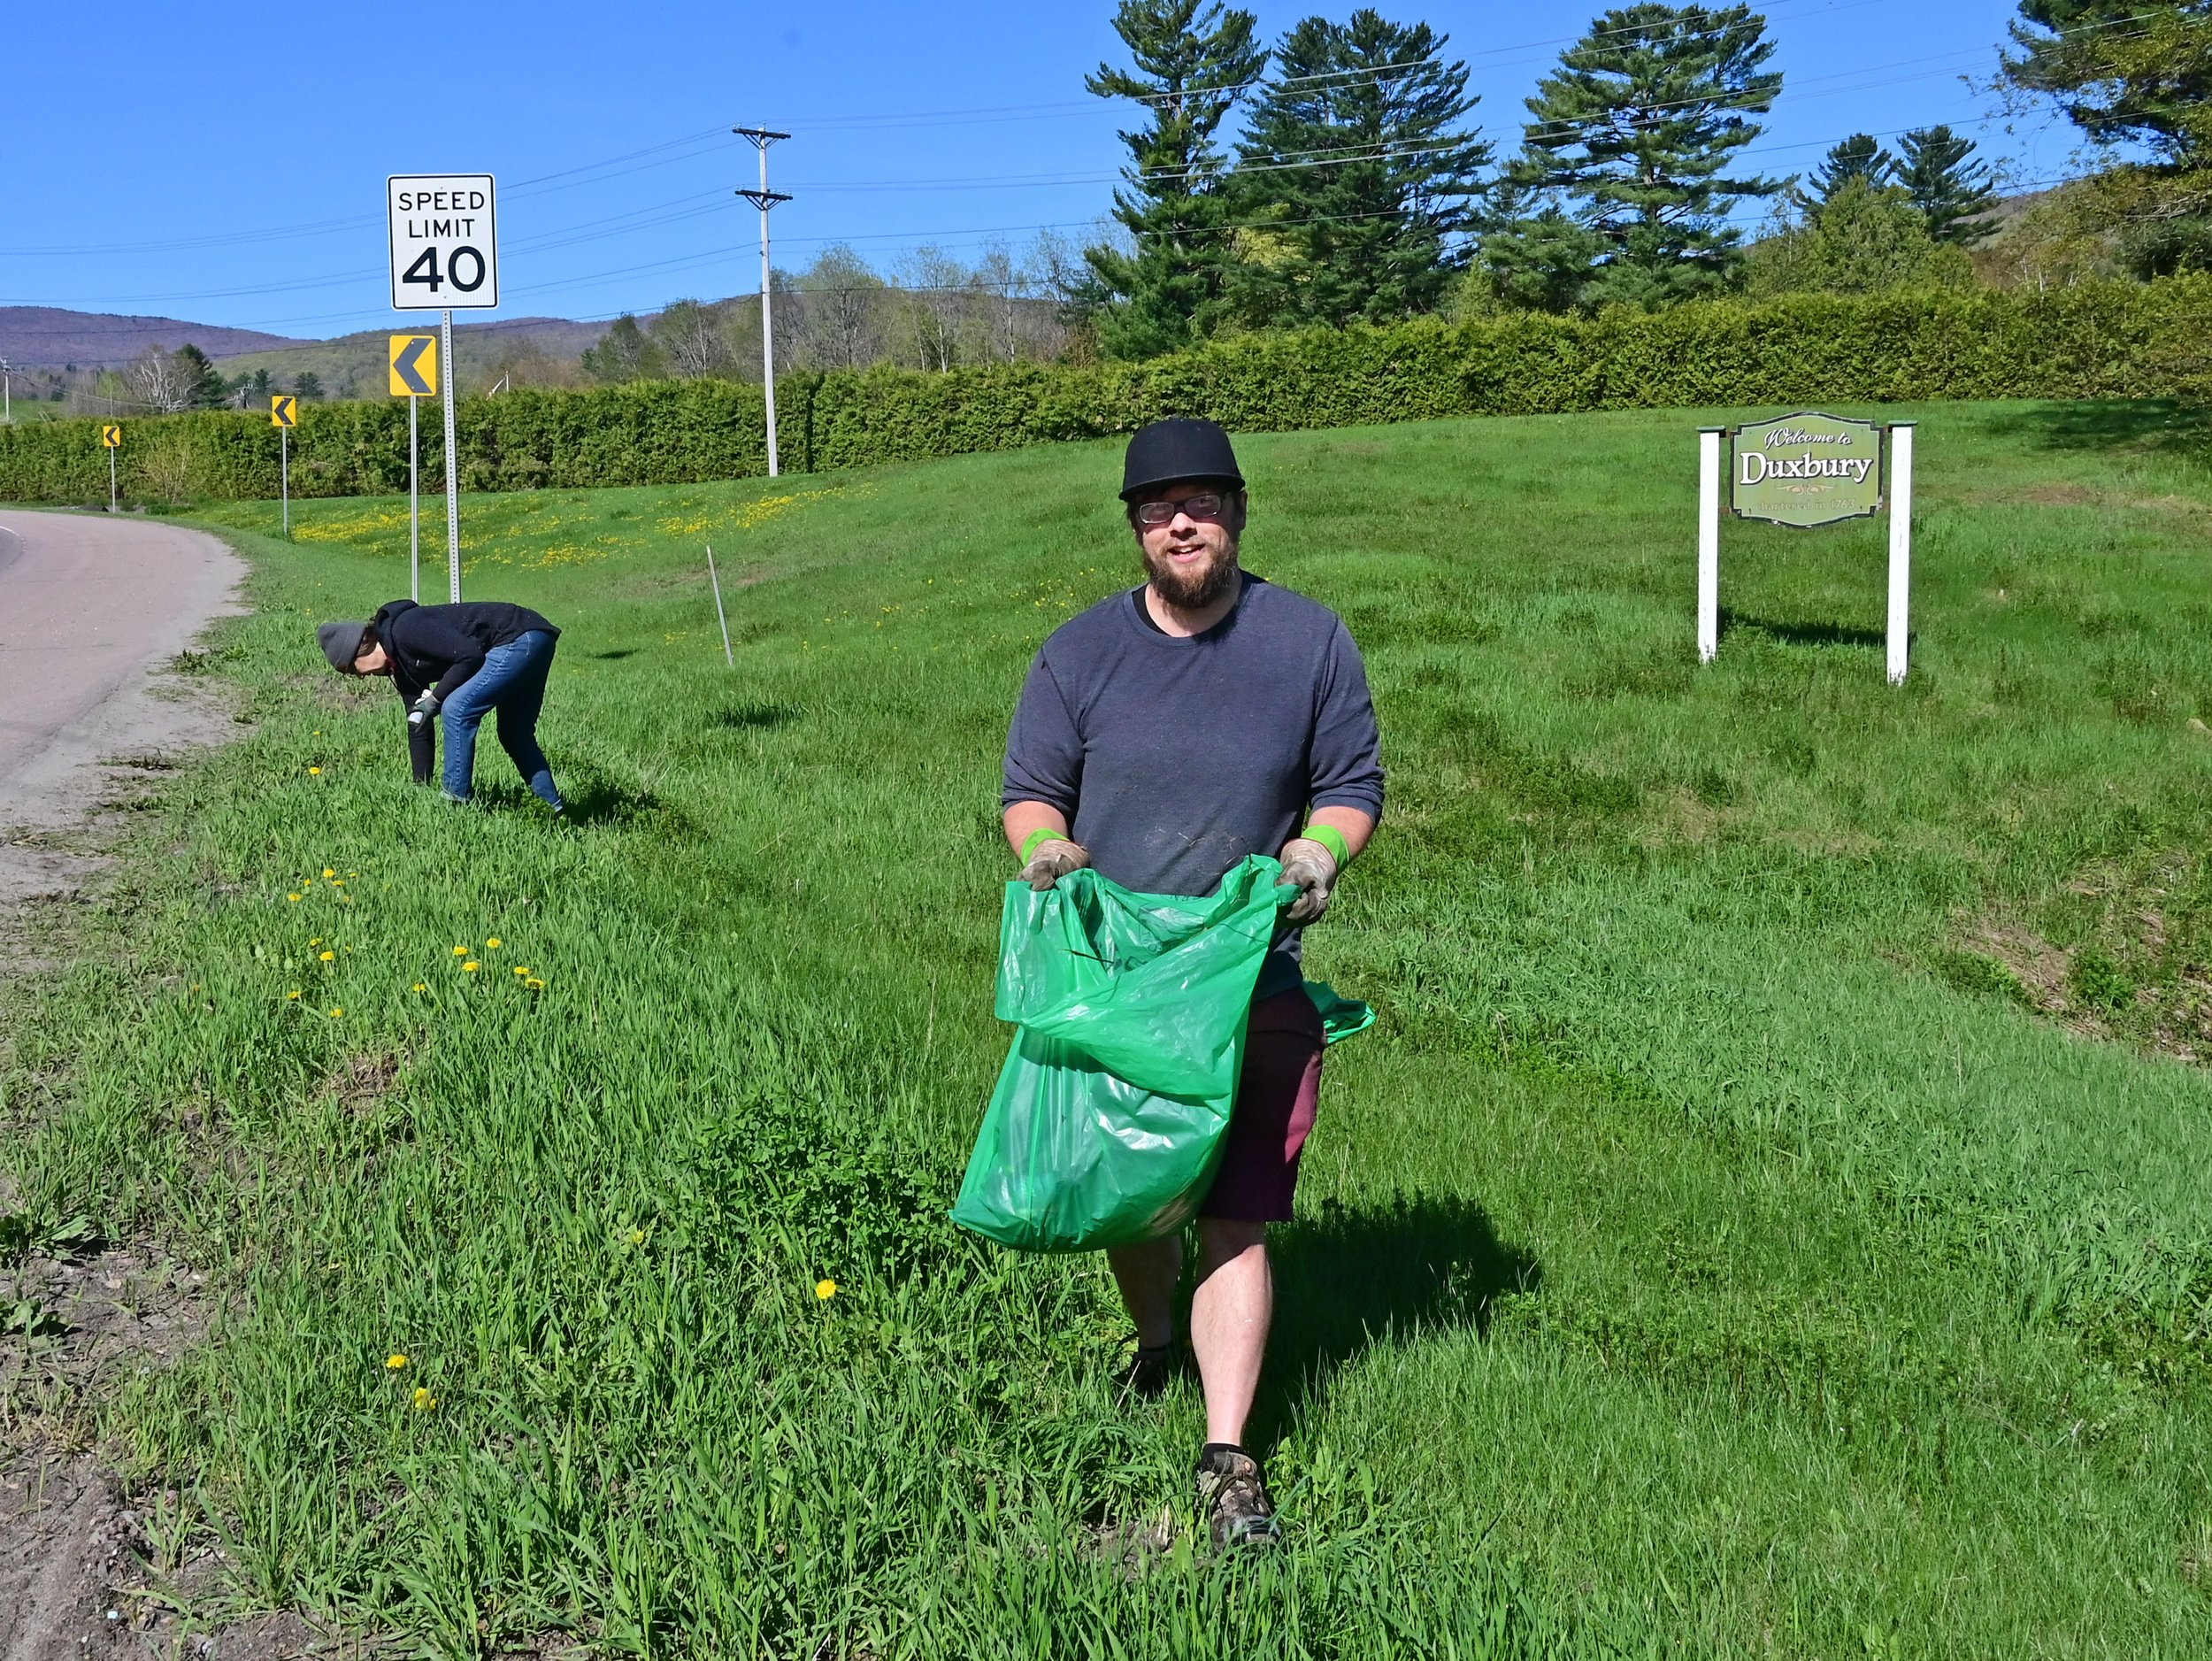   Keith and DeAnna Romstead find trash in the grass along Rt. 100 at the Welcome to Duxbury sign. Photo by Gordon Miller  